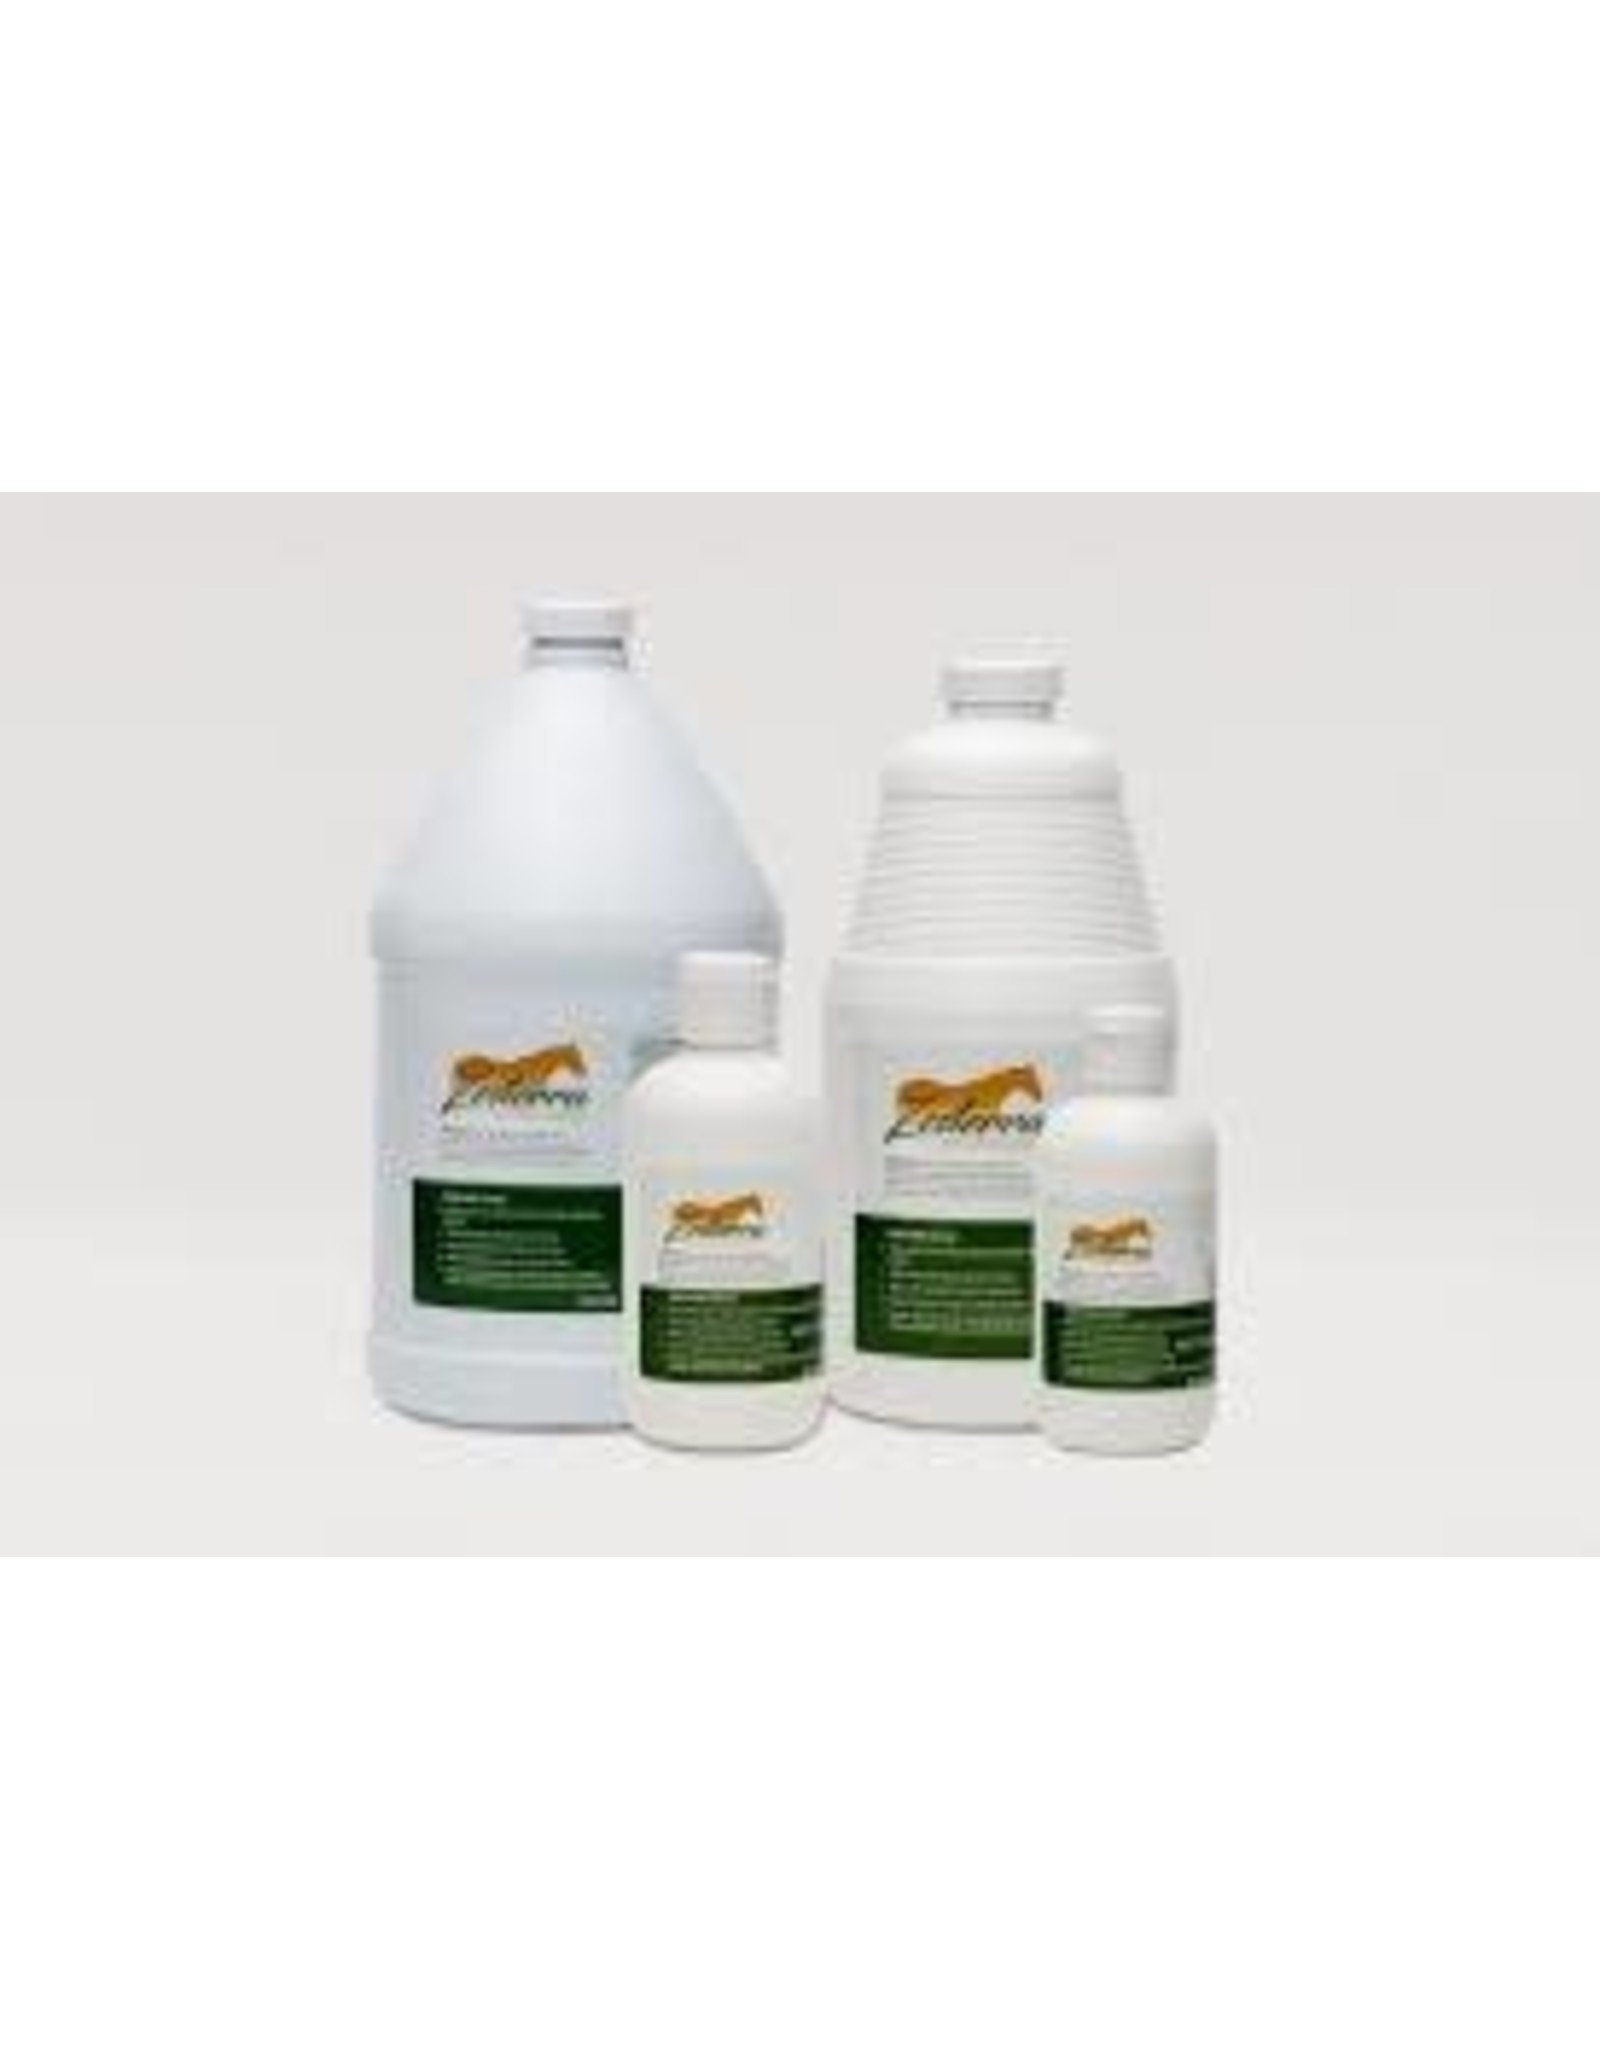 Zesterra Zesterra - 100% all-natural supplement for horses.  Formulated to provide support for horses that are prone to stress or experience ulcers or ulcer symptoms.   ZE 250ml